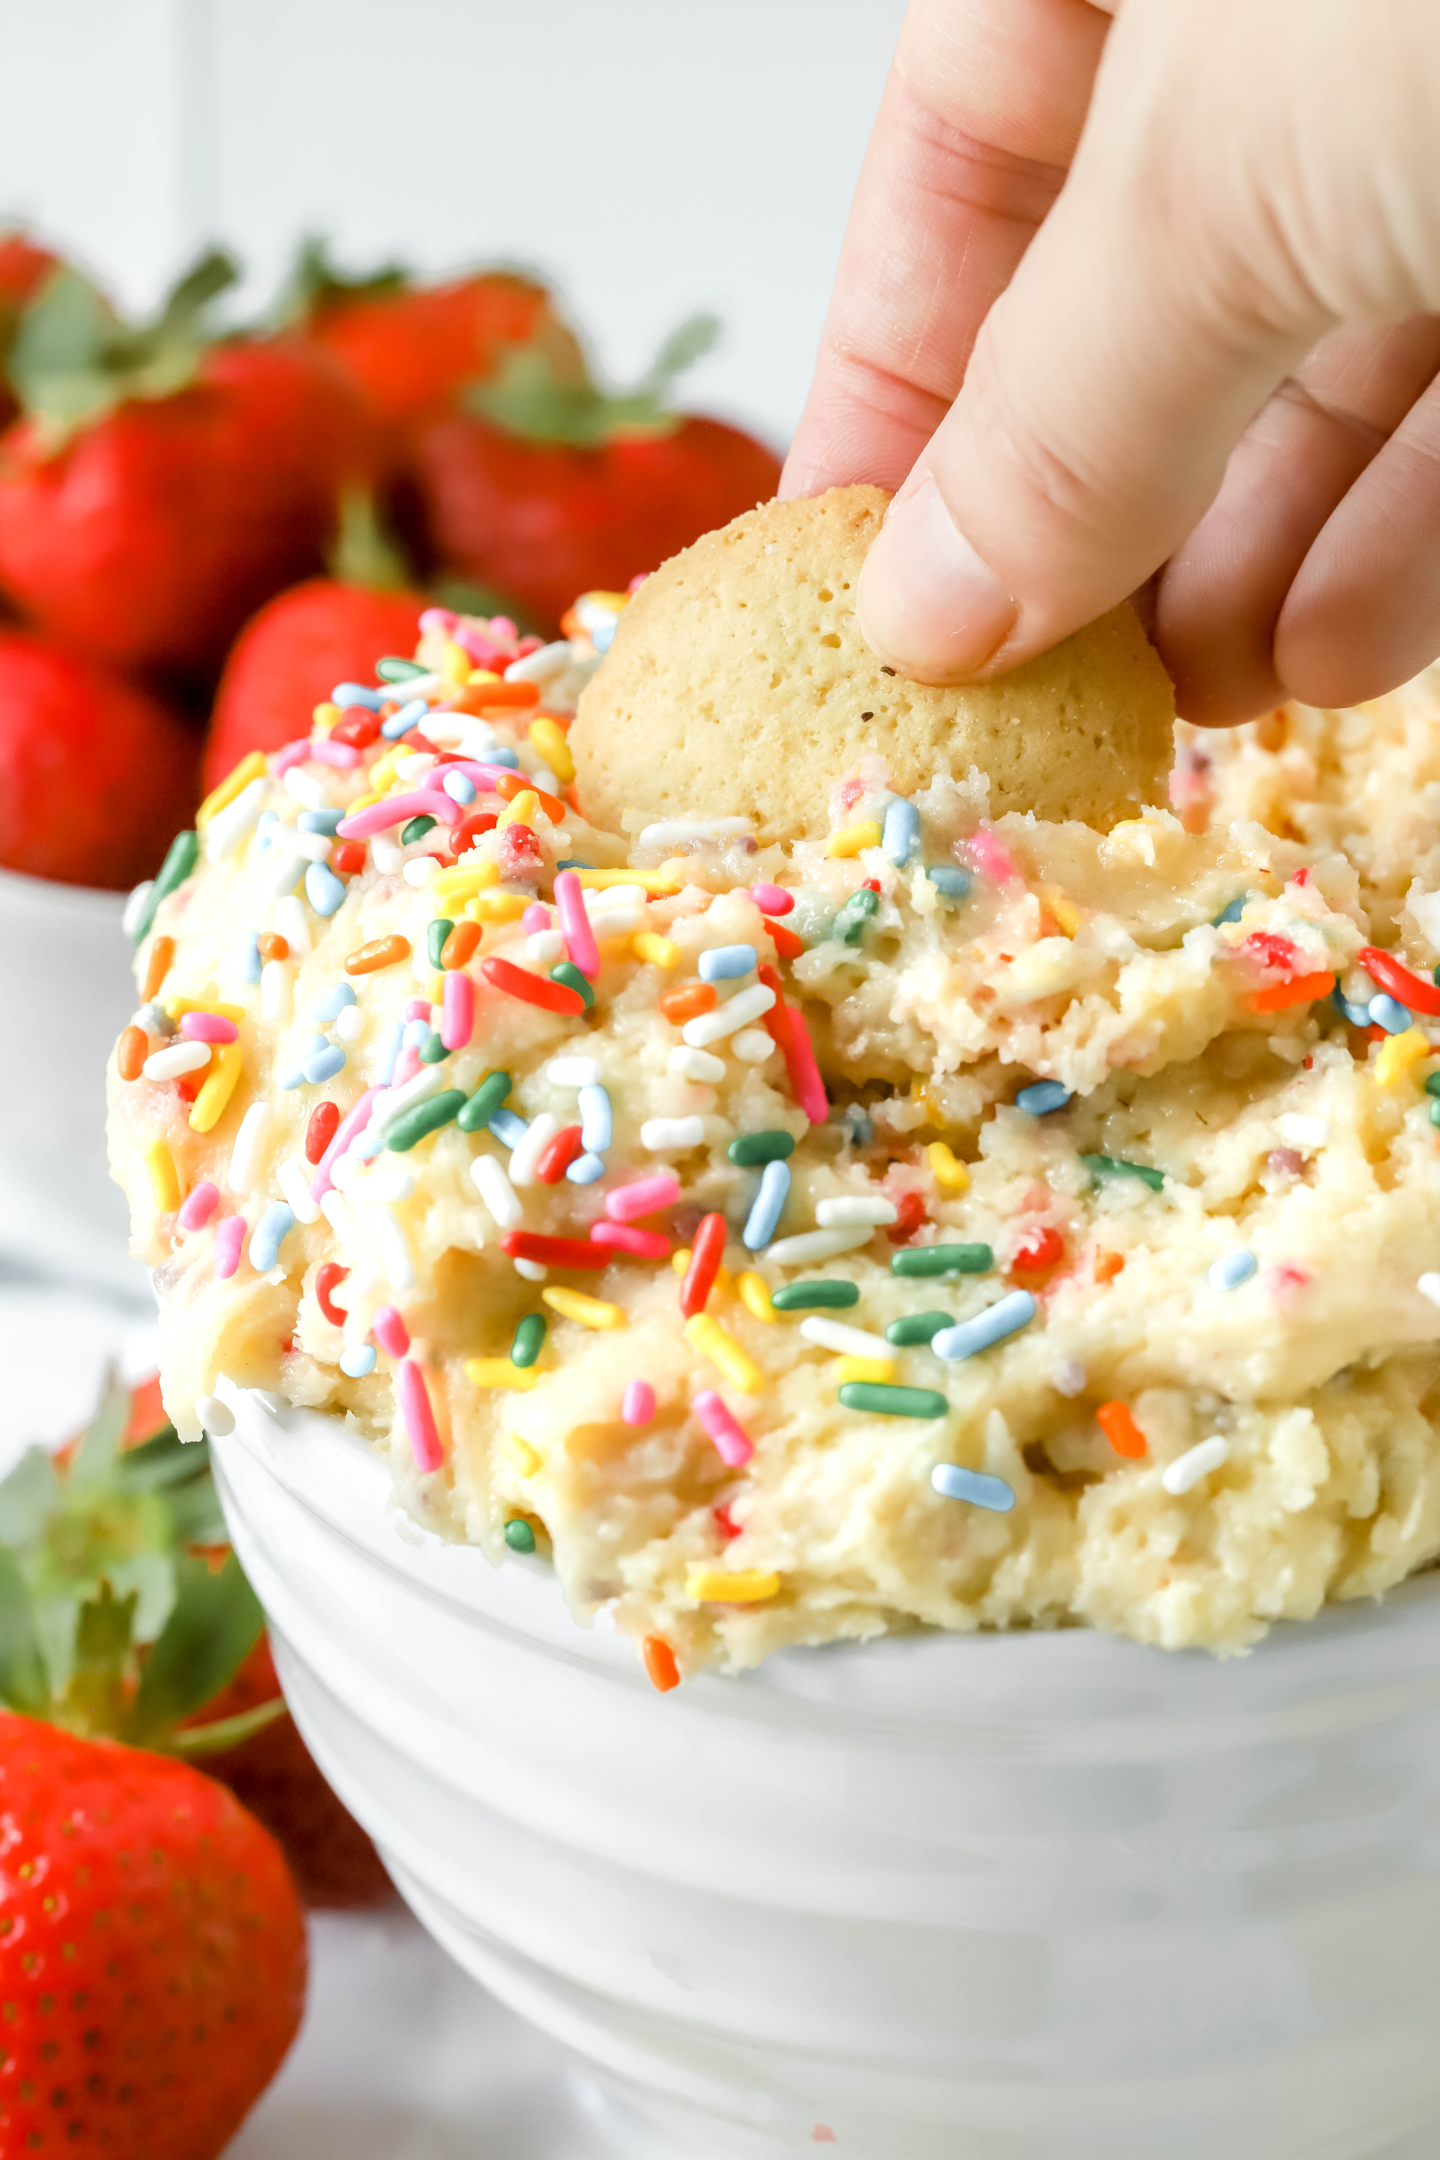 Nilla vanilla wafer being dipped into a bowl of Funfetti cake batter dip